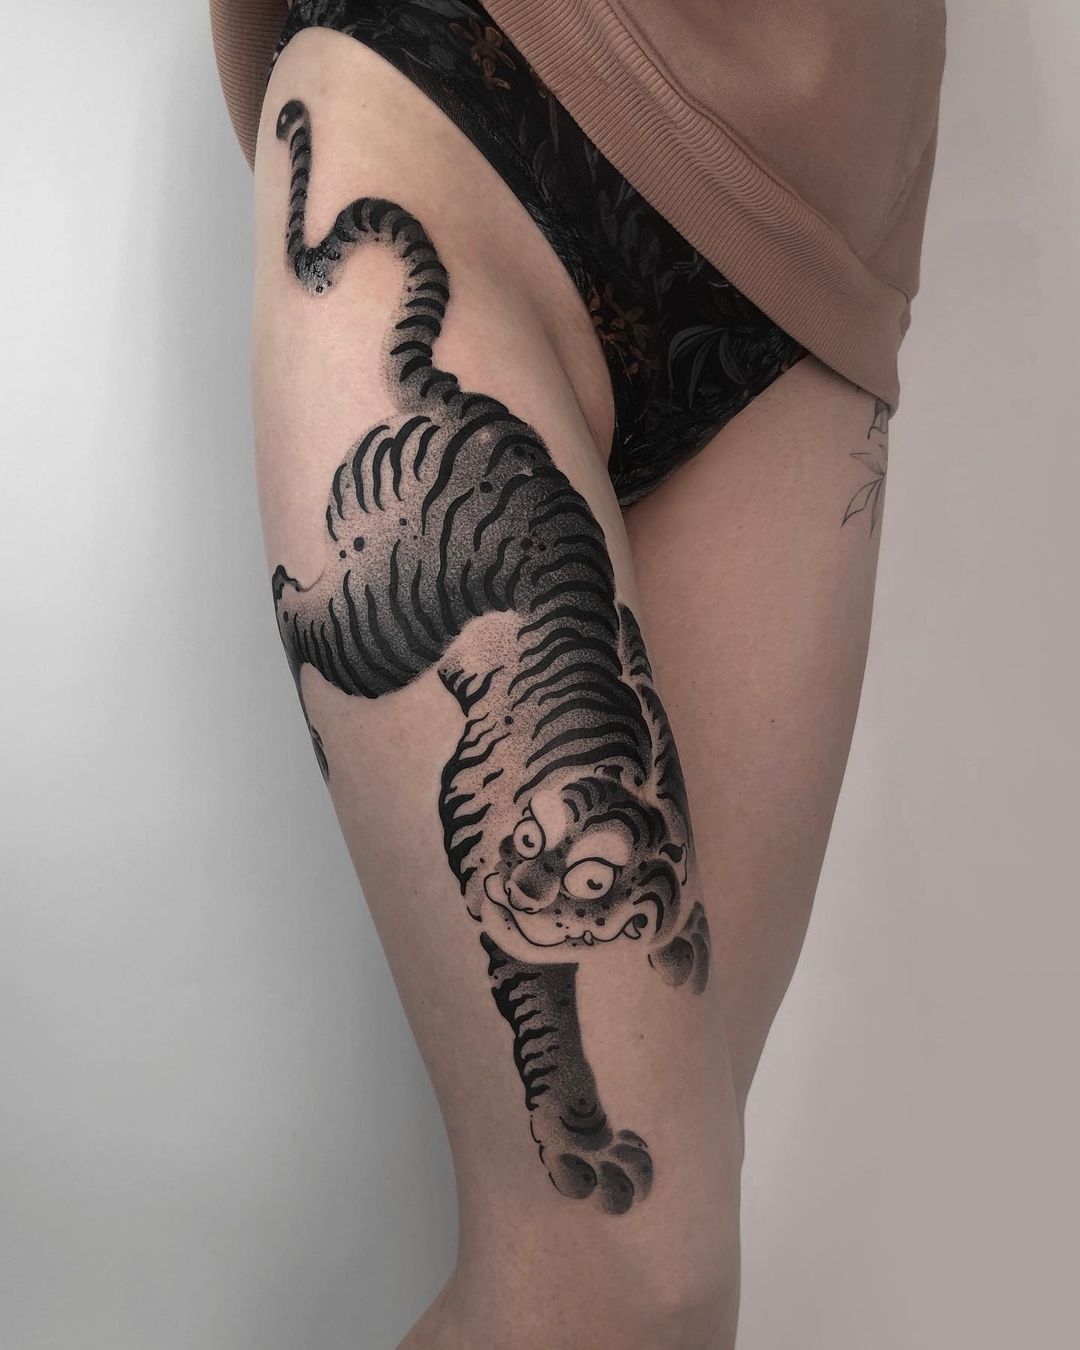 Art on Tumblr: Amazing artist Alex Young @alexyoungtattoo awesome orange  eyes Siberian tiger flowers arm tattoo!